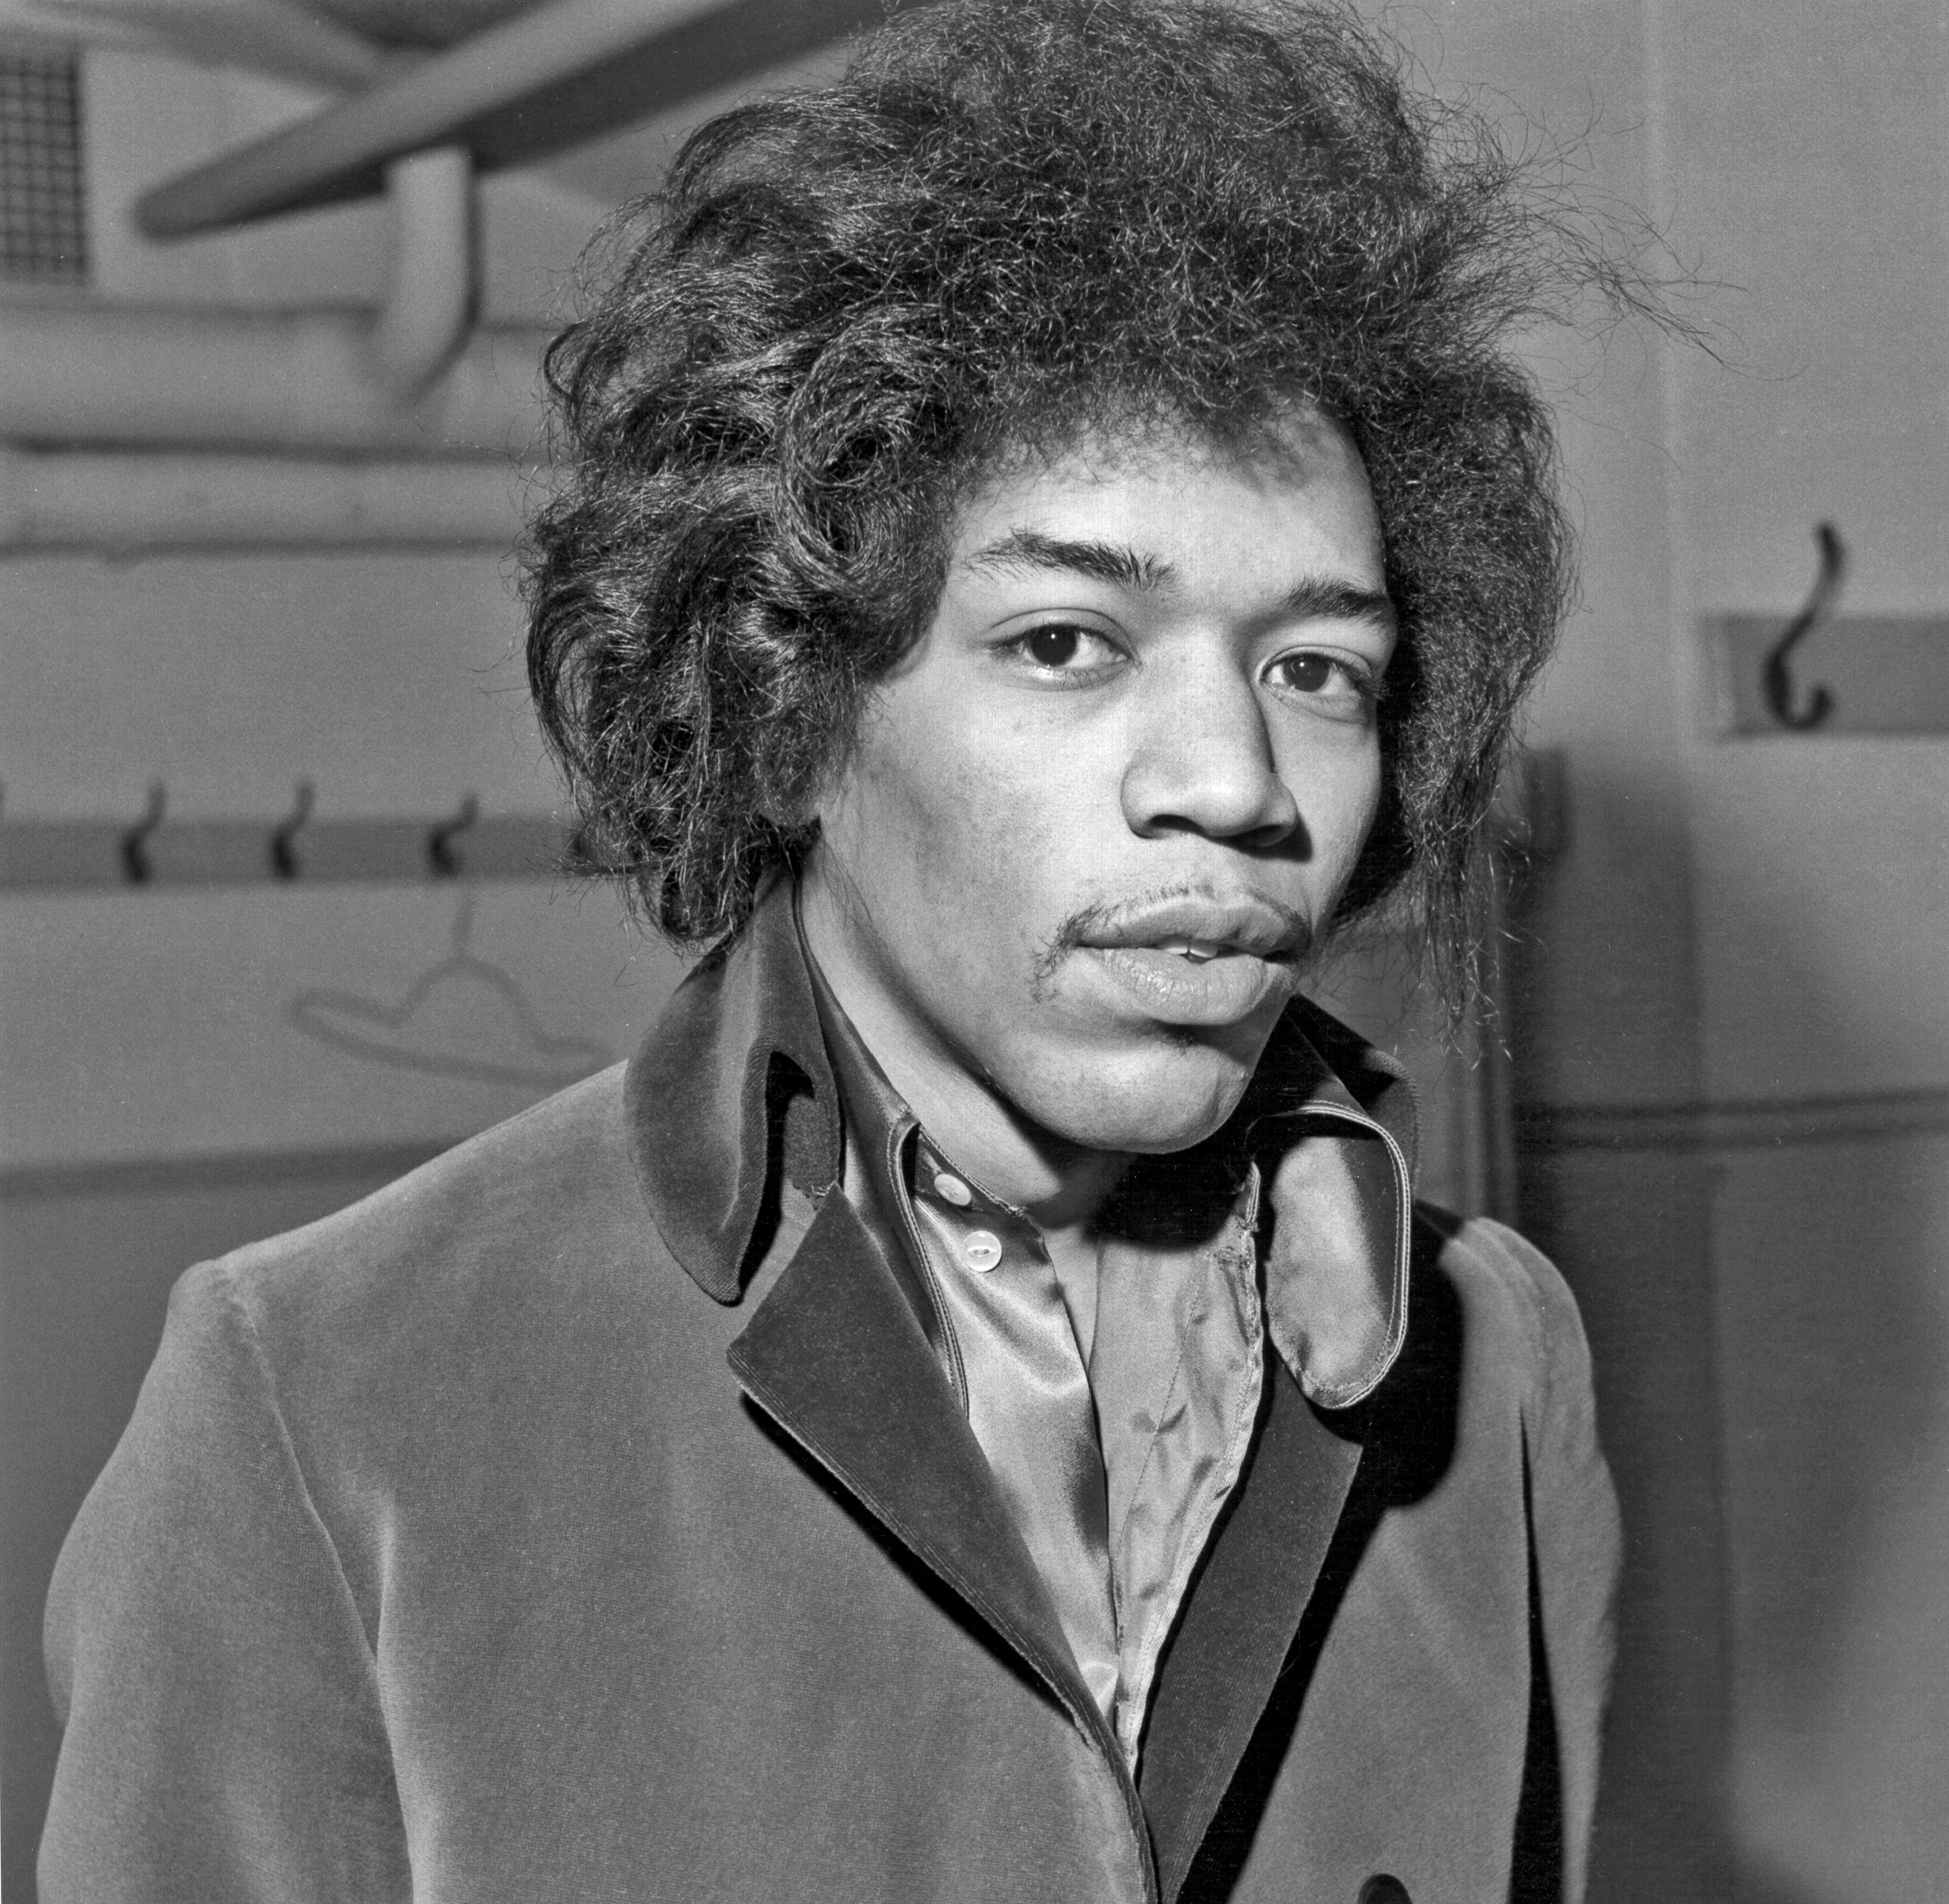 A Character in the Beatles Movie ‘Across the Universe’ Is Based on Jimi Hendrix